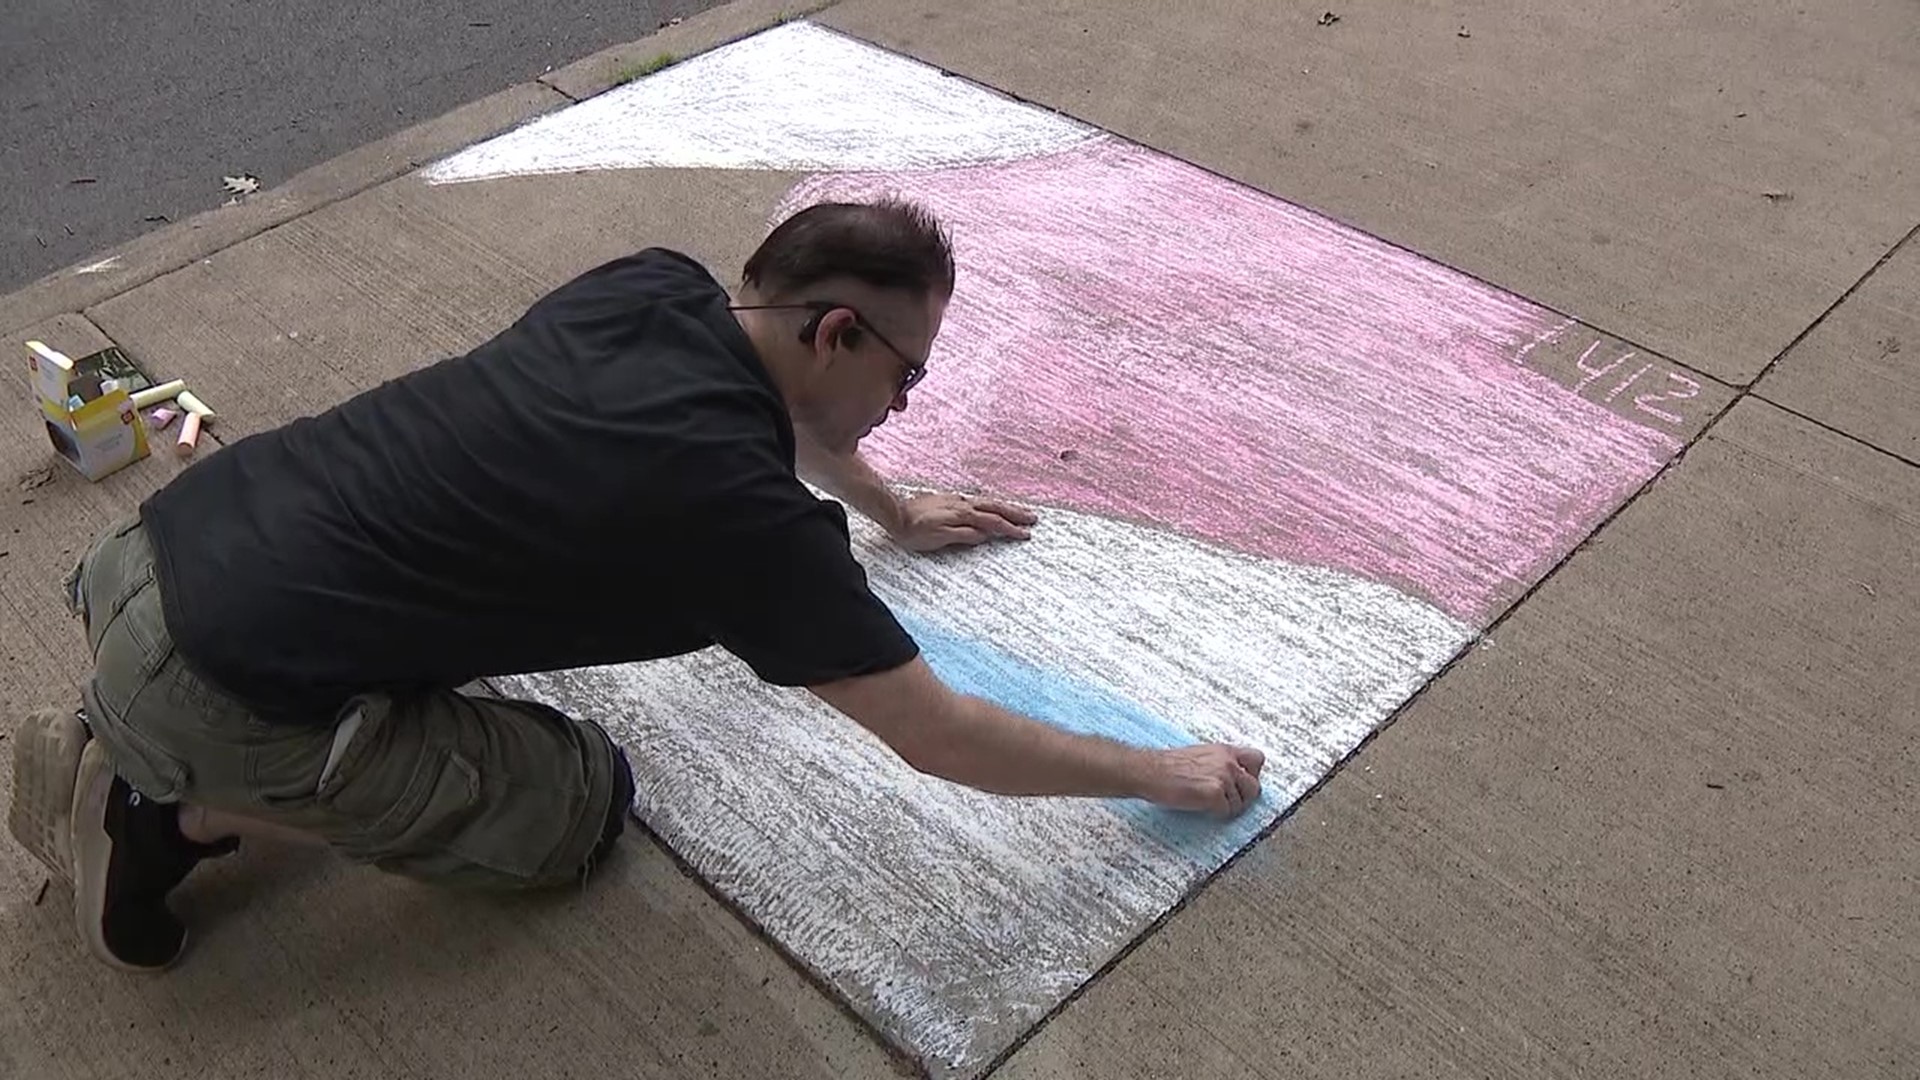 Artists of all skill levels are participating in the Lewisburg Sidewalk Chalk Festival.